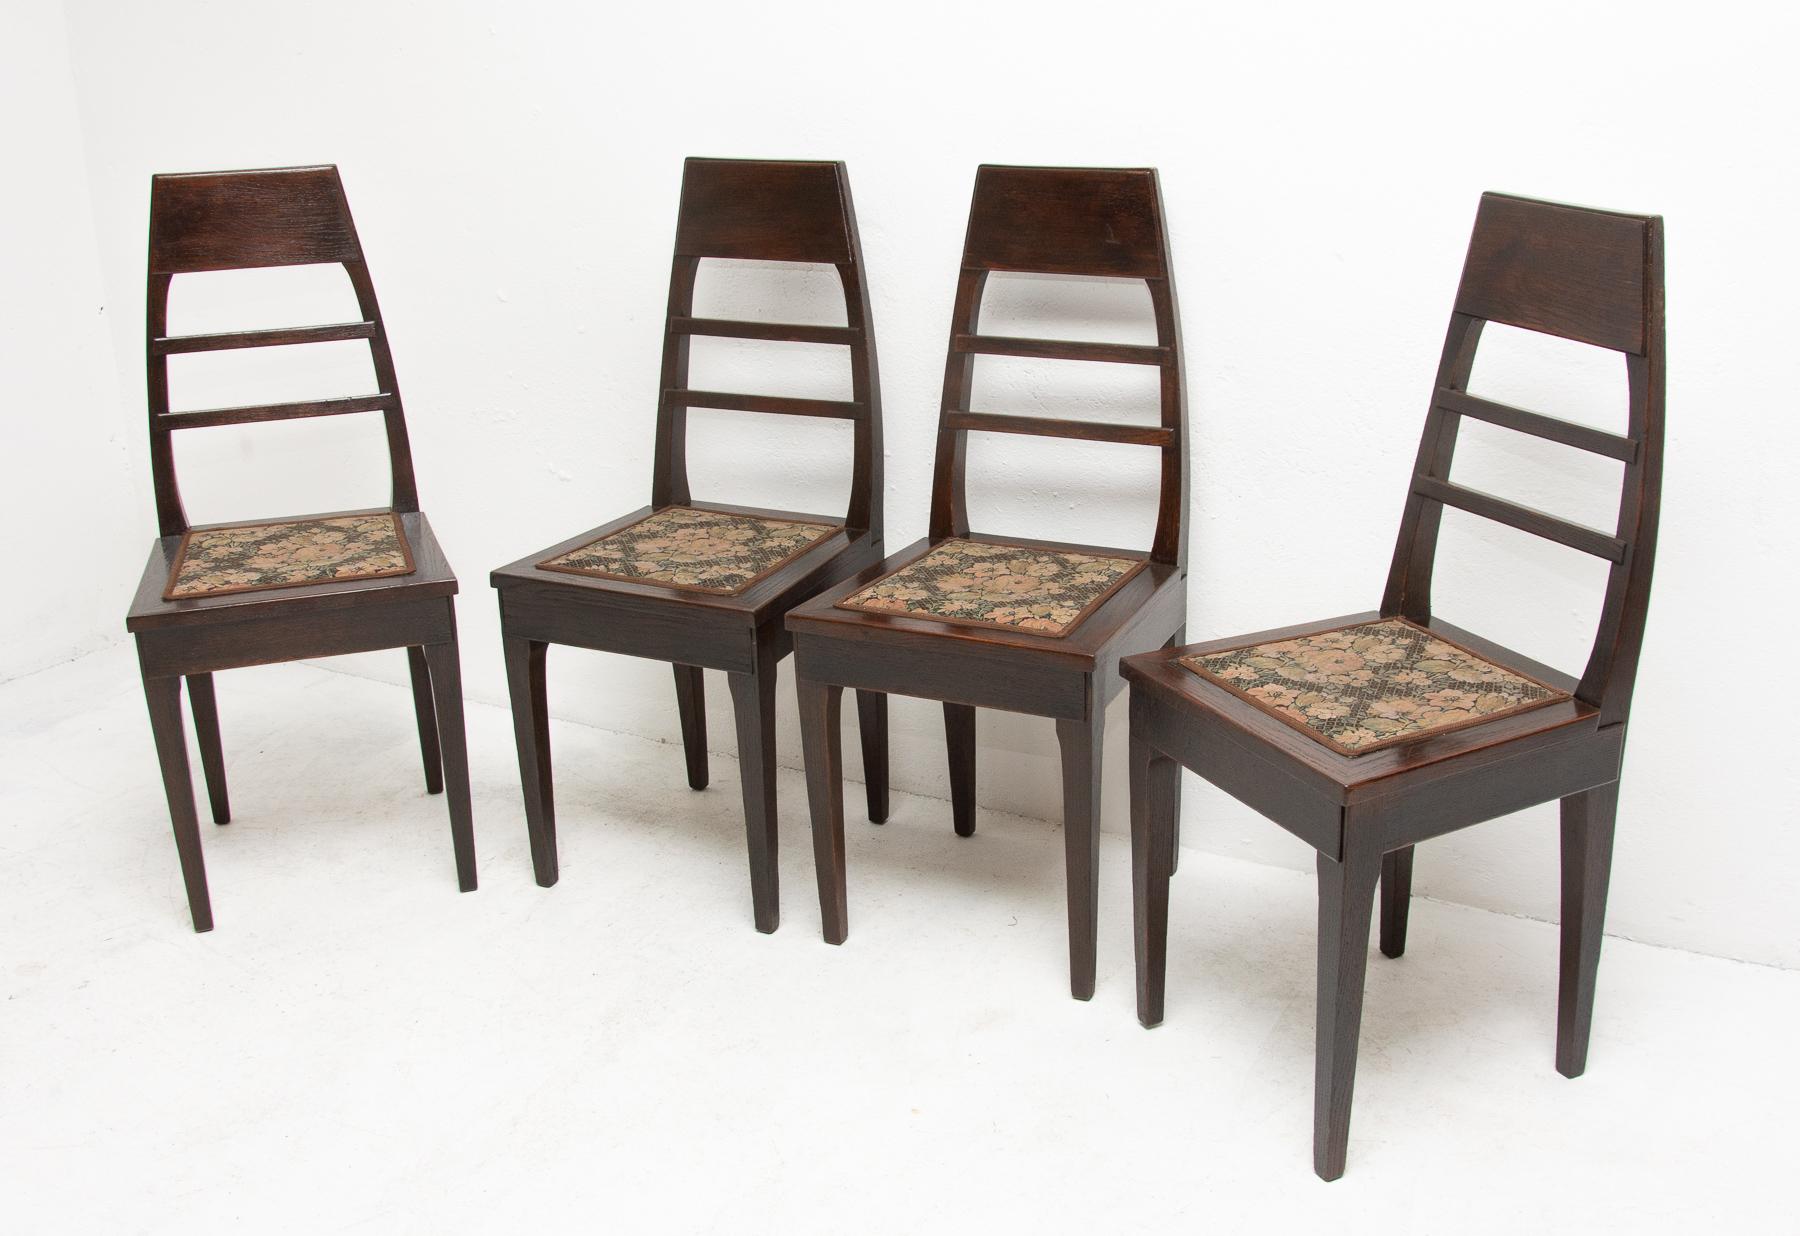 These secession dining chairs were produced in Bohemia- Austria-Hungary, circa 1910. They are made of dark stained oakwood. They feature an original upholstery. The chairs are in very good condition, they have been renovated using shellac. Price is